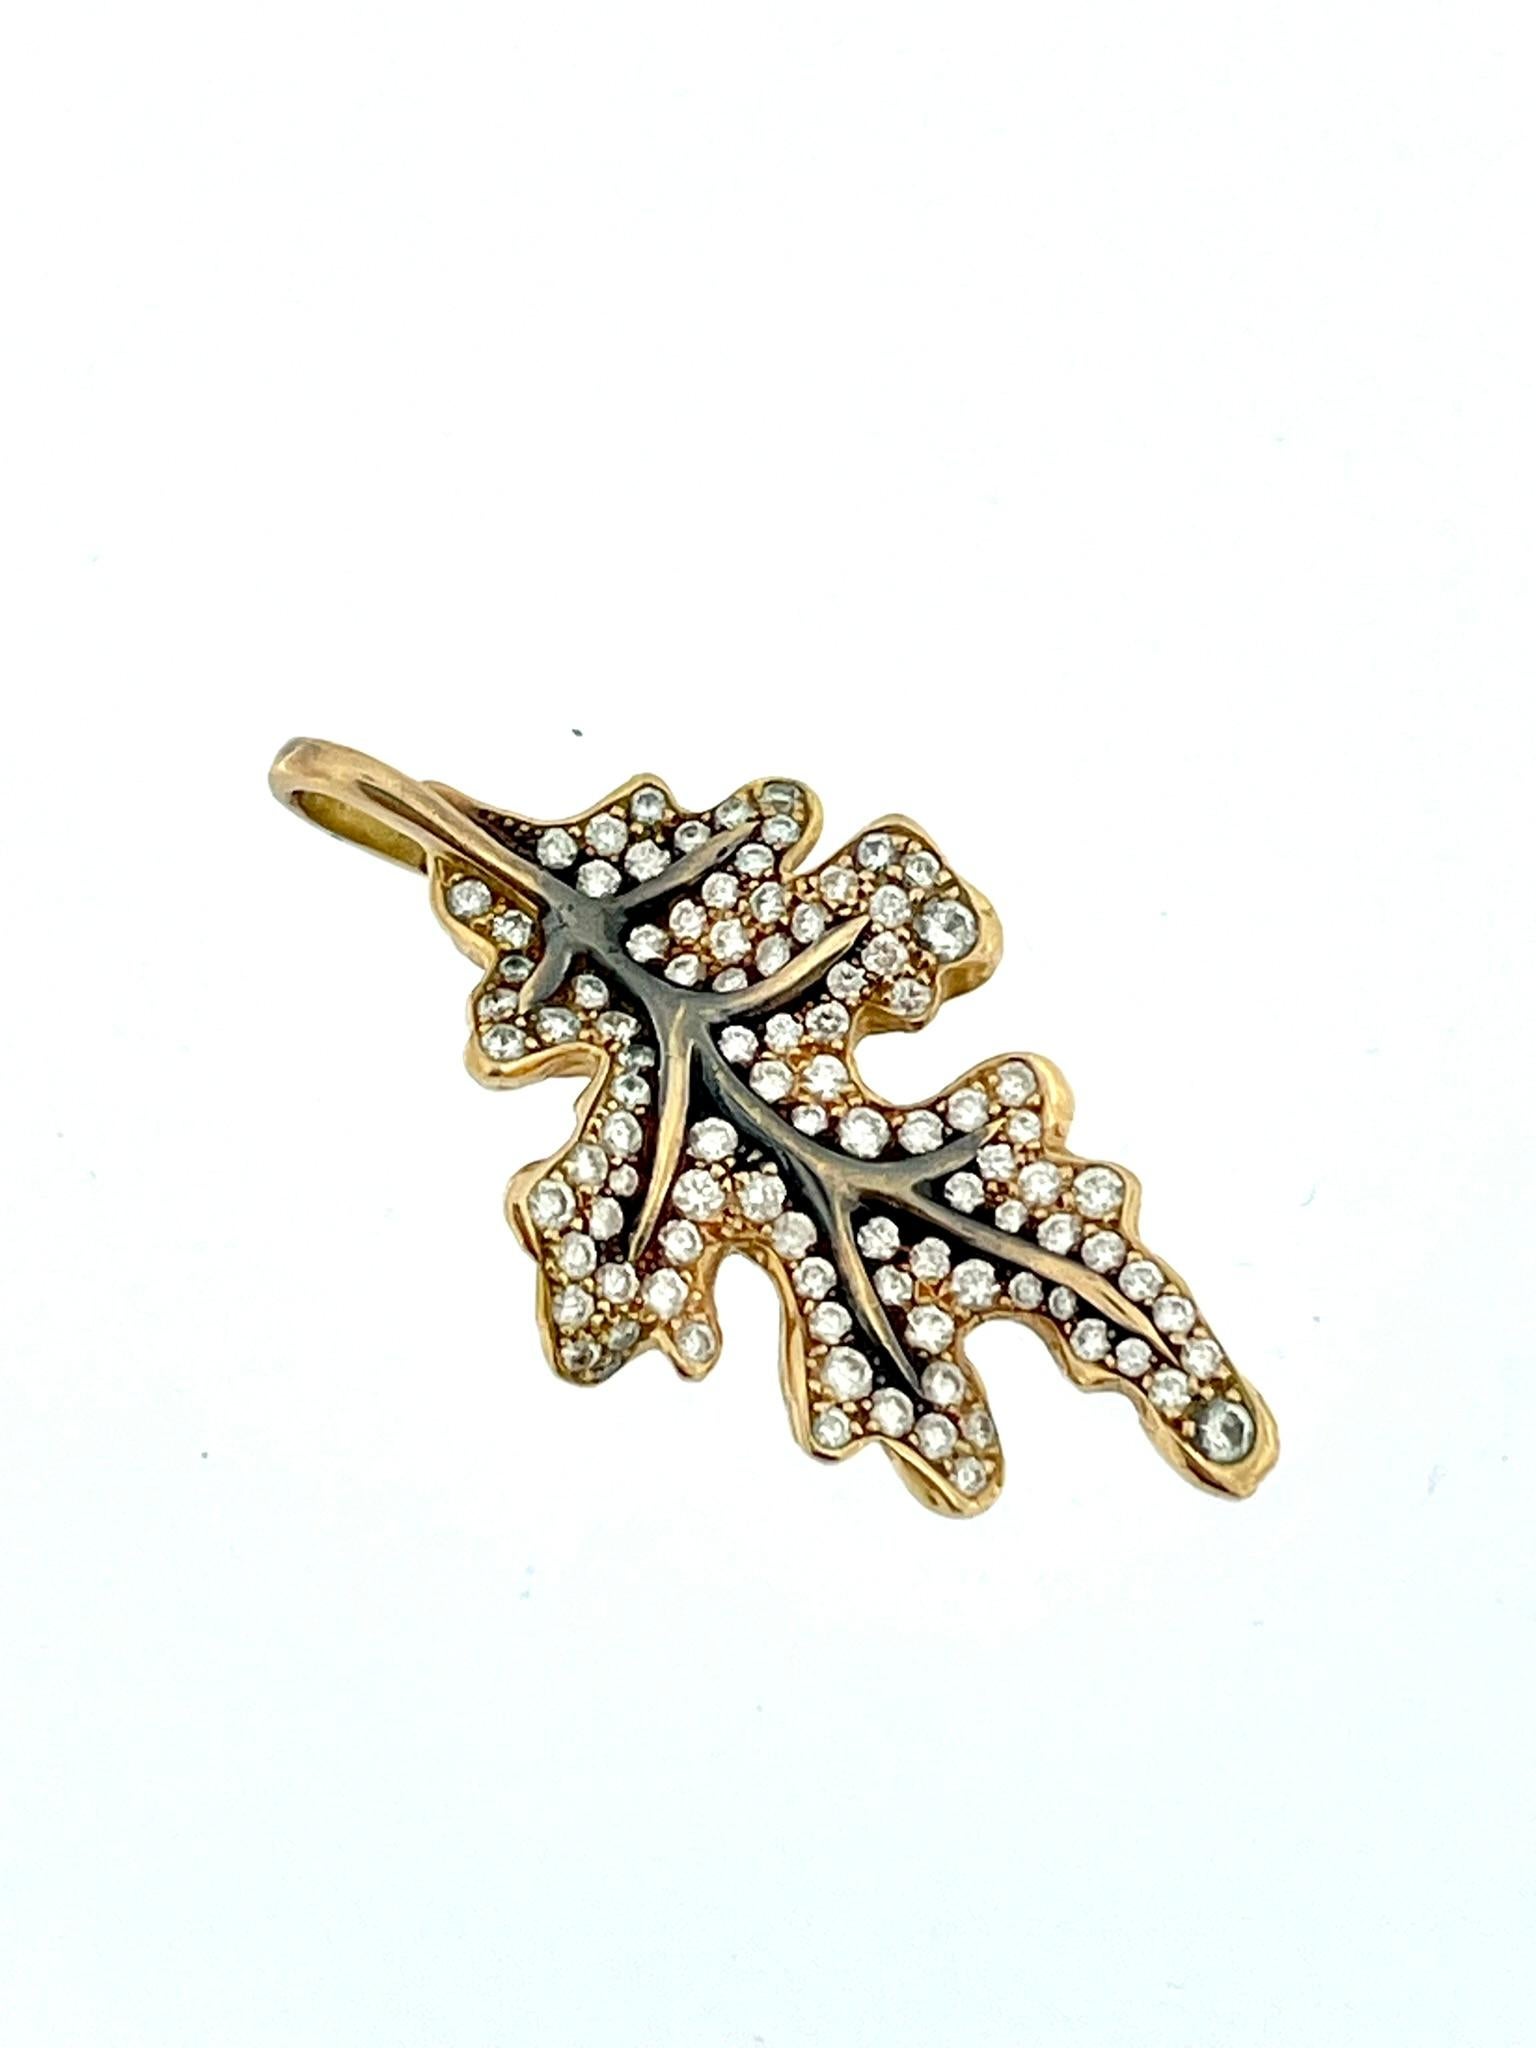 Brilliant Cut Leaf 18kt Yellow Gold, Black Oxidation and Diamonds For Sale